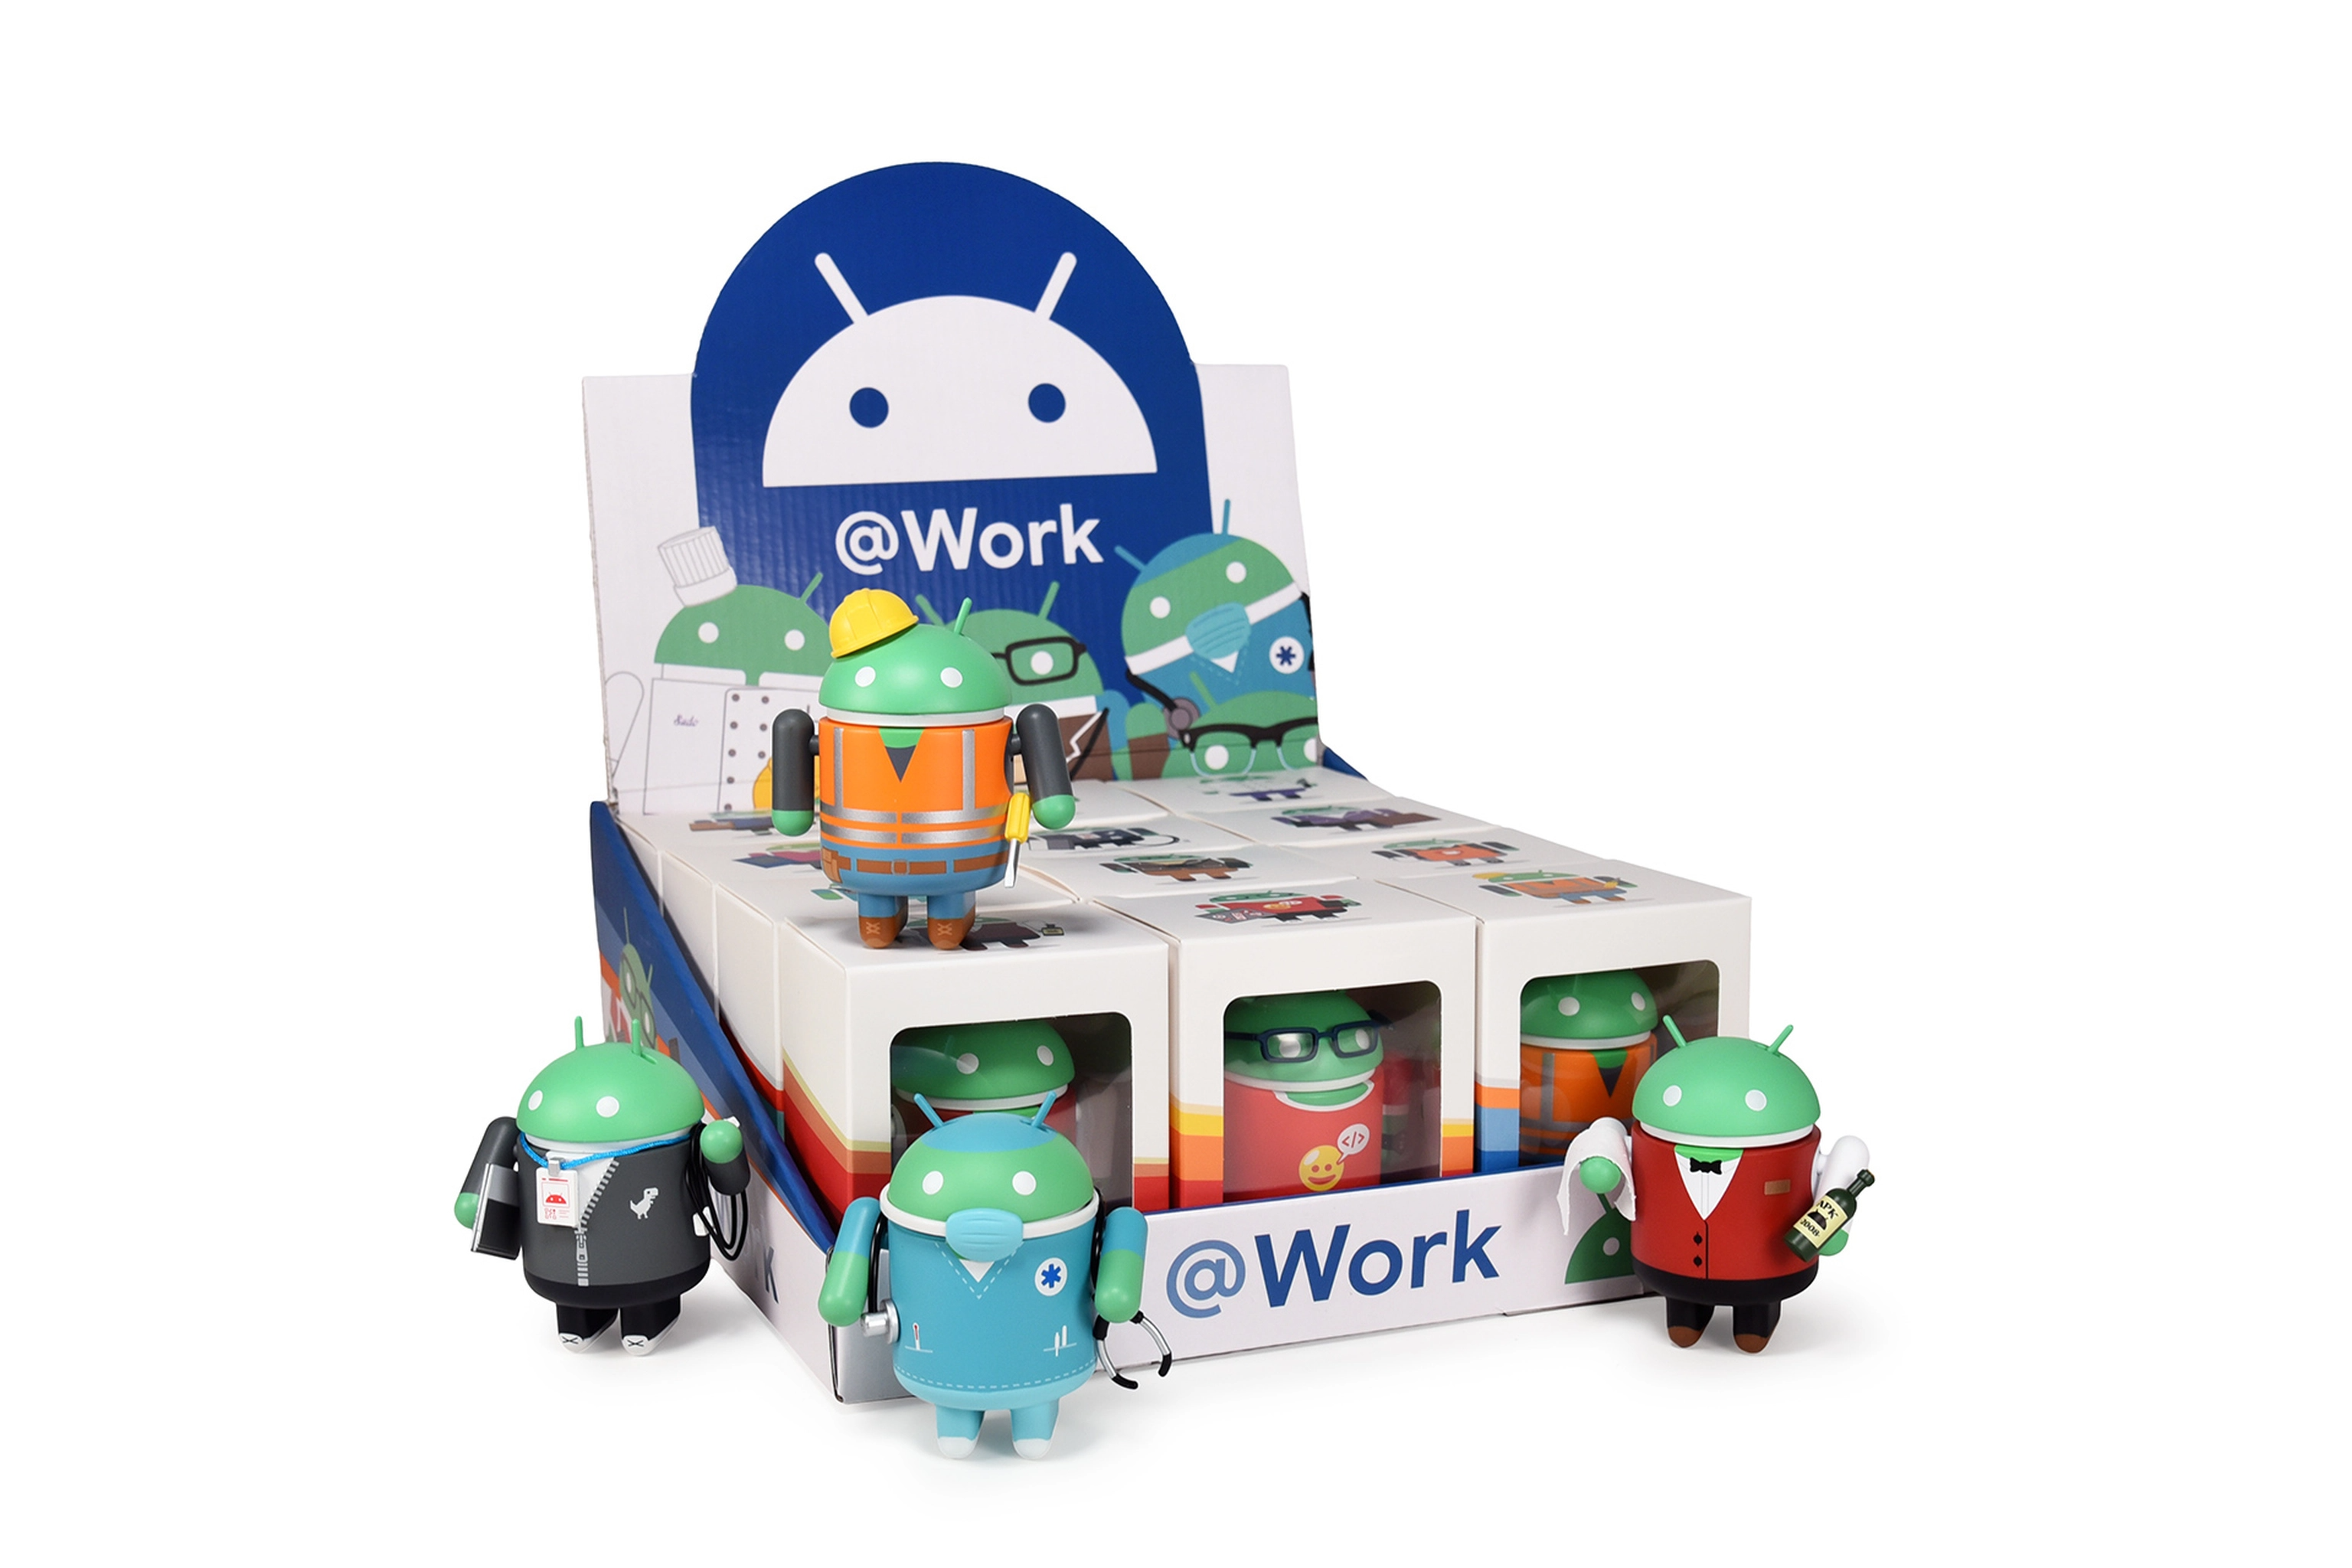 An image of 12 boxed bugdroid figurines in a tray. The toys are dressed as workers in different occupations and are part of the '@Work' collection from studio Dead Zebra